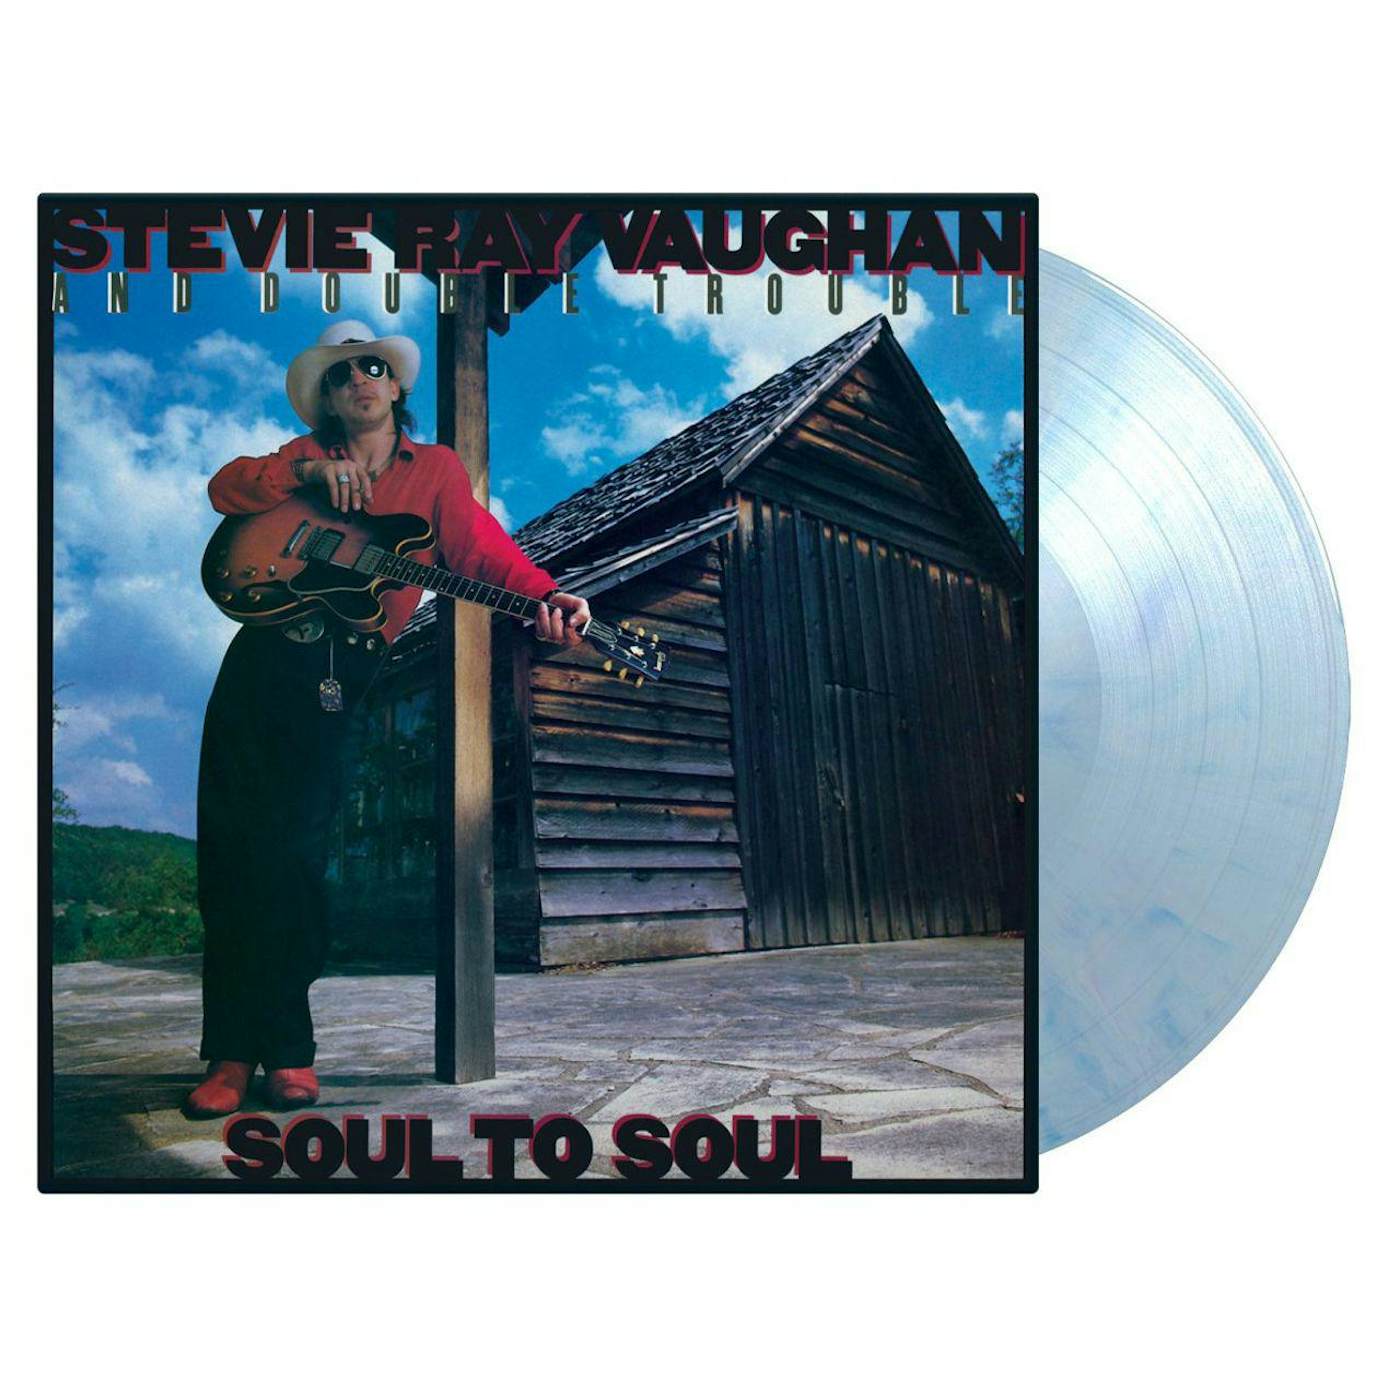 Stevie Ray Vaughan Soul To Soul (Limited/180g/Blue Marble Colored) Vinyl Record